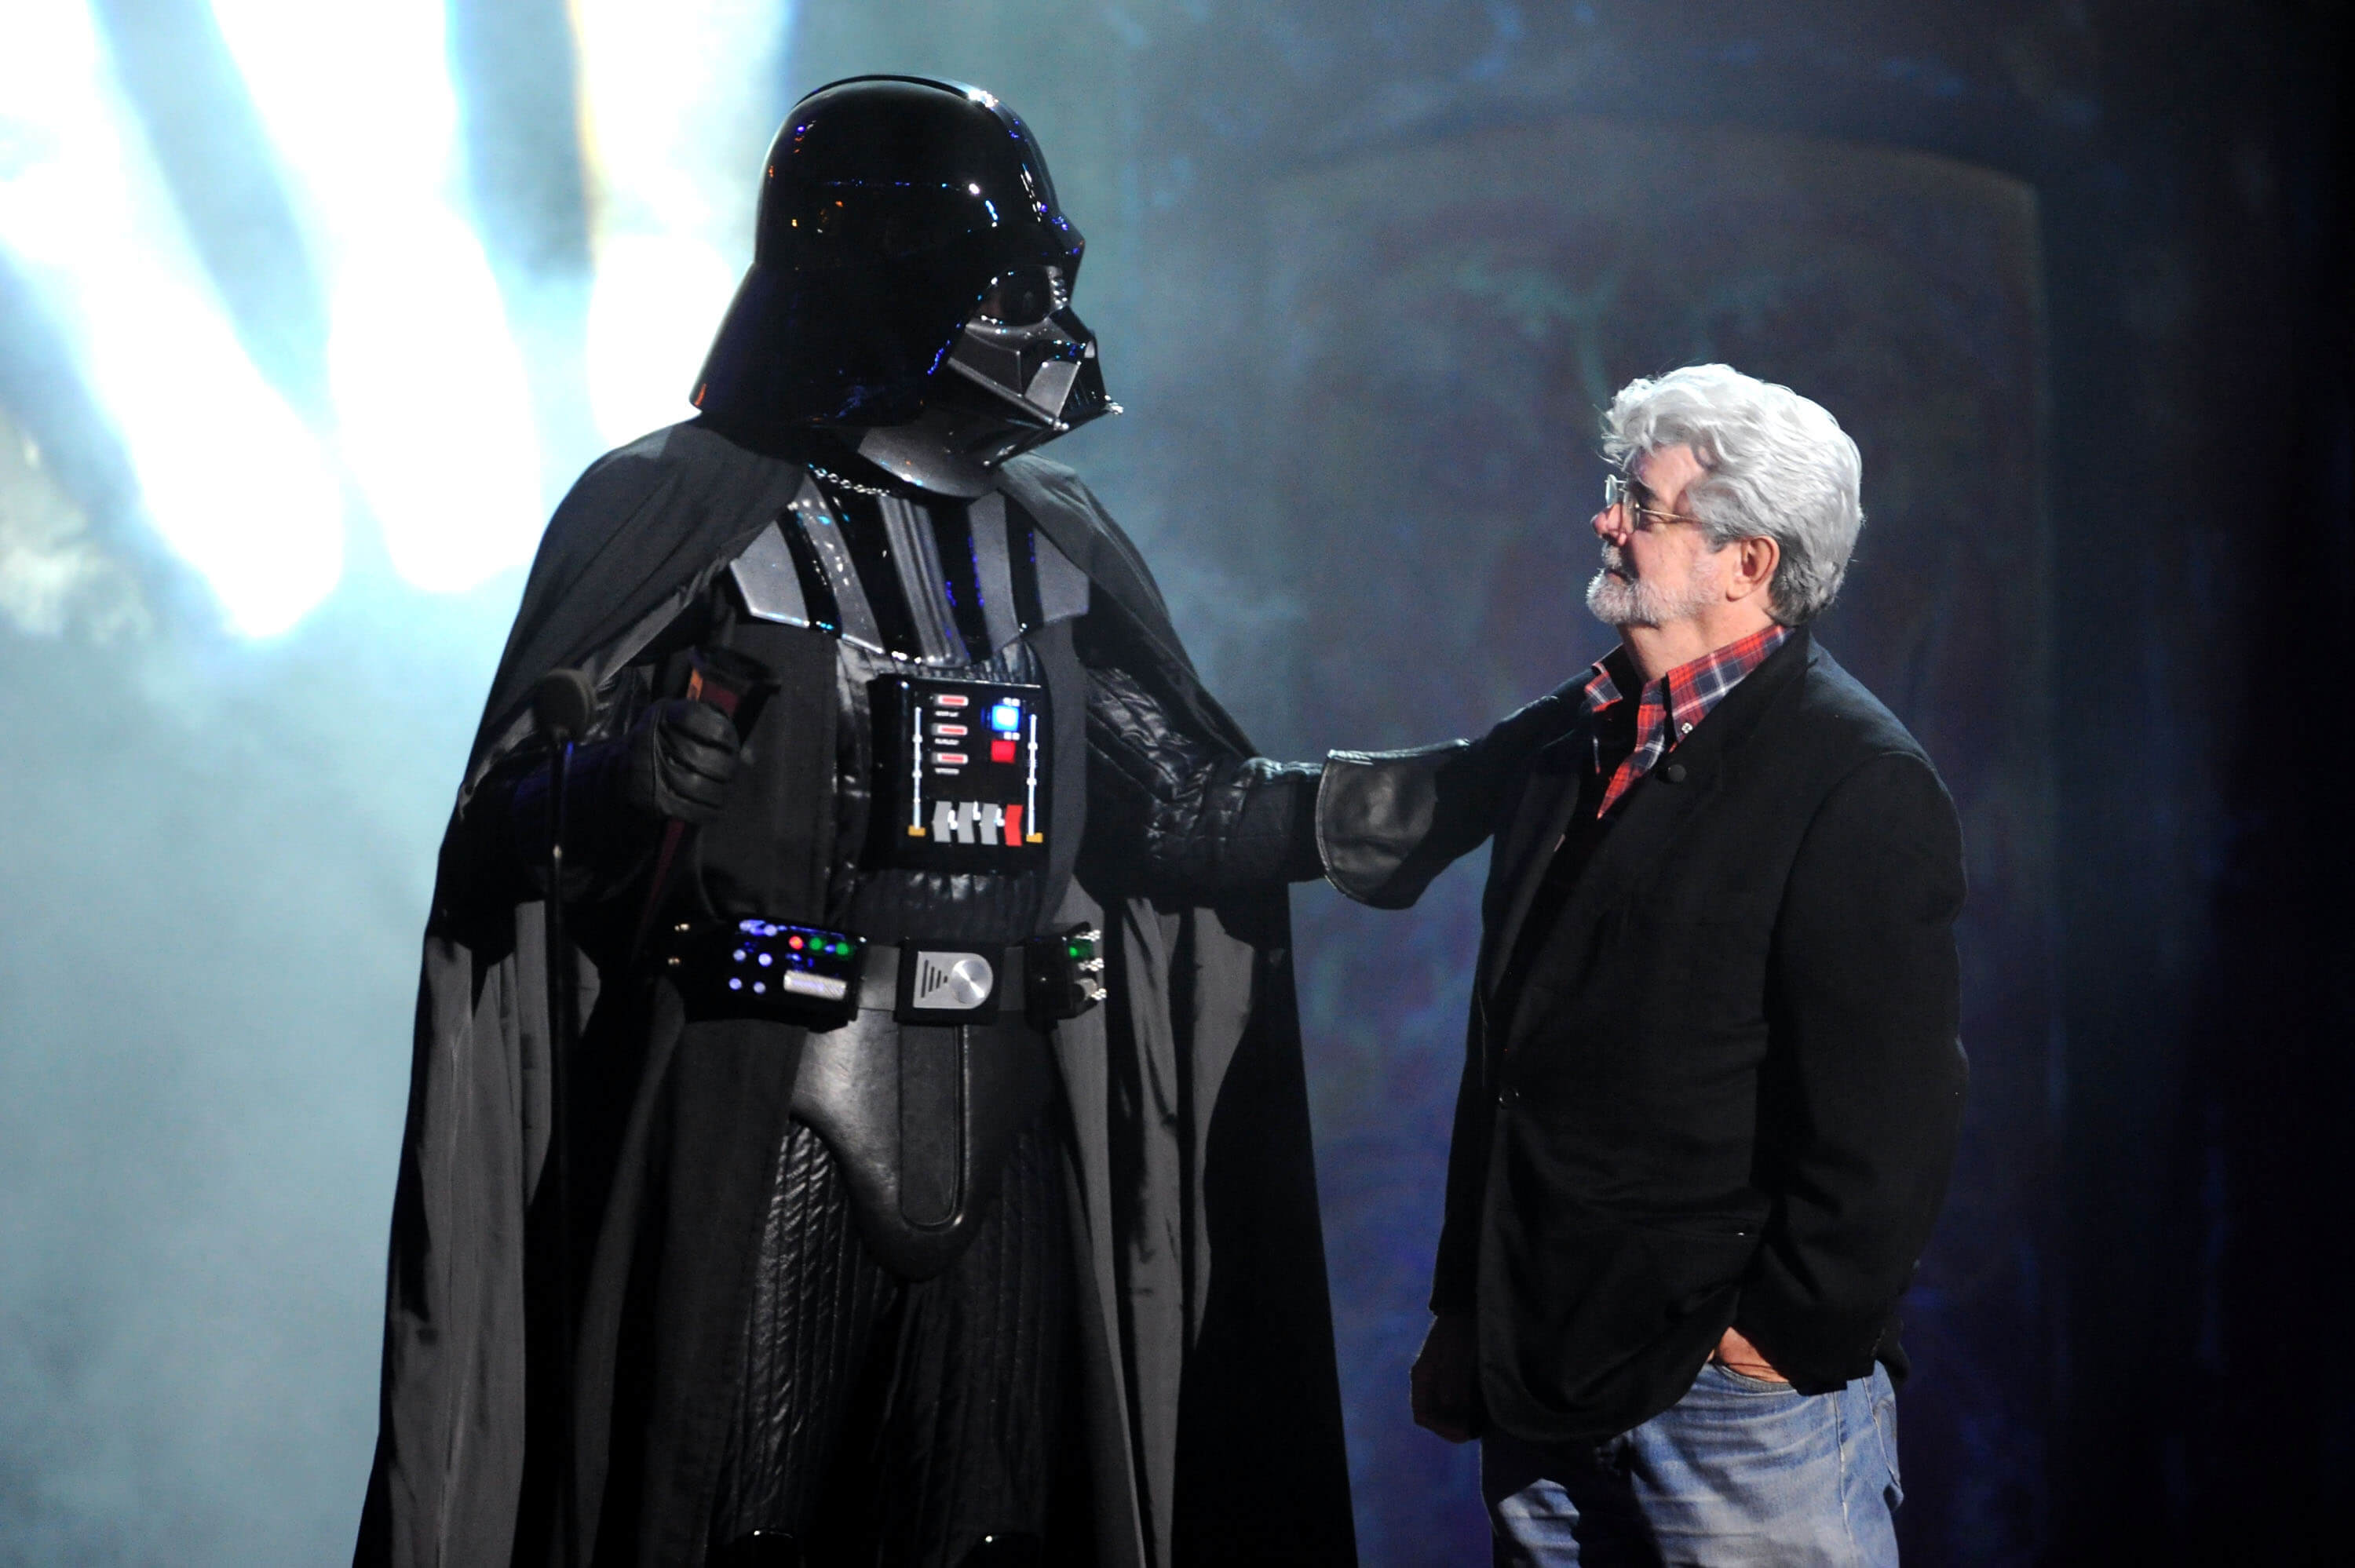 Star Wars director George Lucas (R) and Darth Vader onstage during Spike TV's "Scream 2011" at Universal Studios on October 15, 2011 in Universal City, California